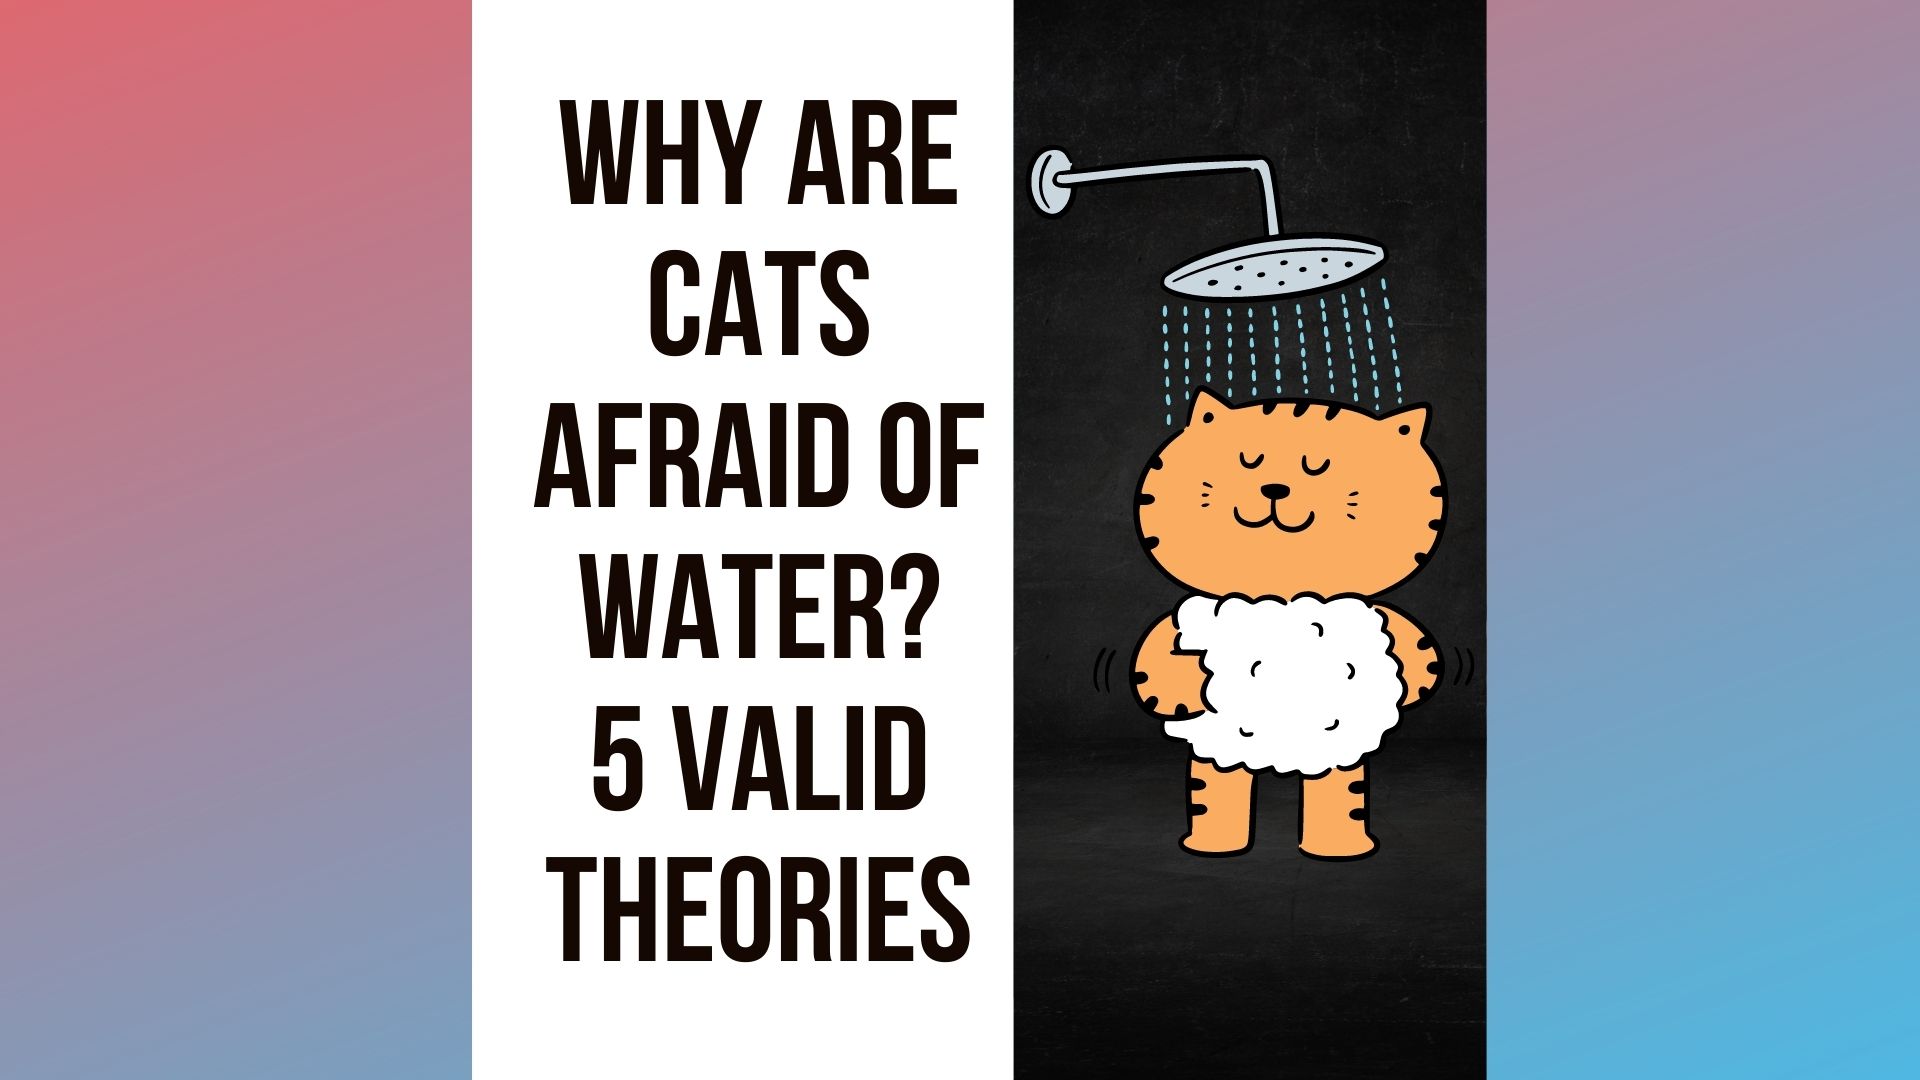 Why Are Cats Afraid of Water?